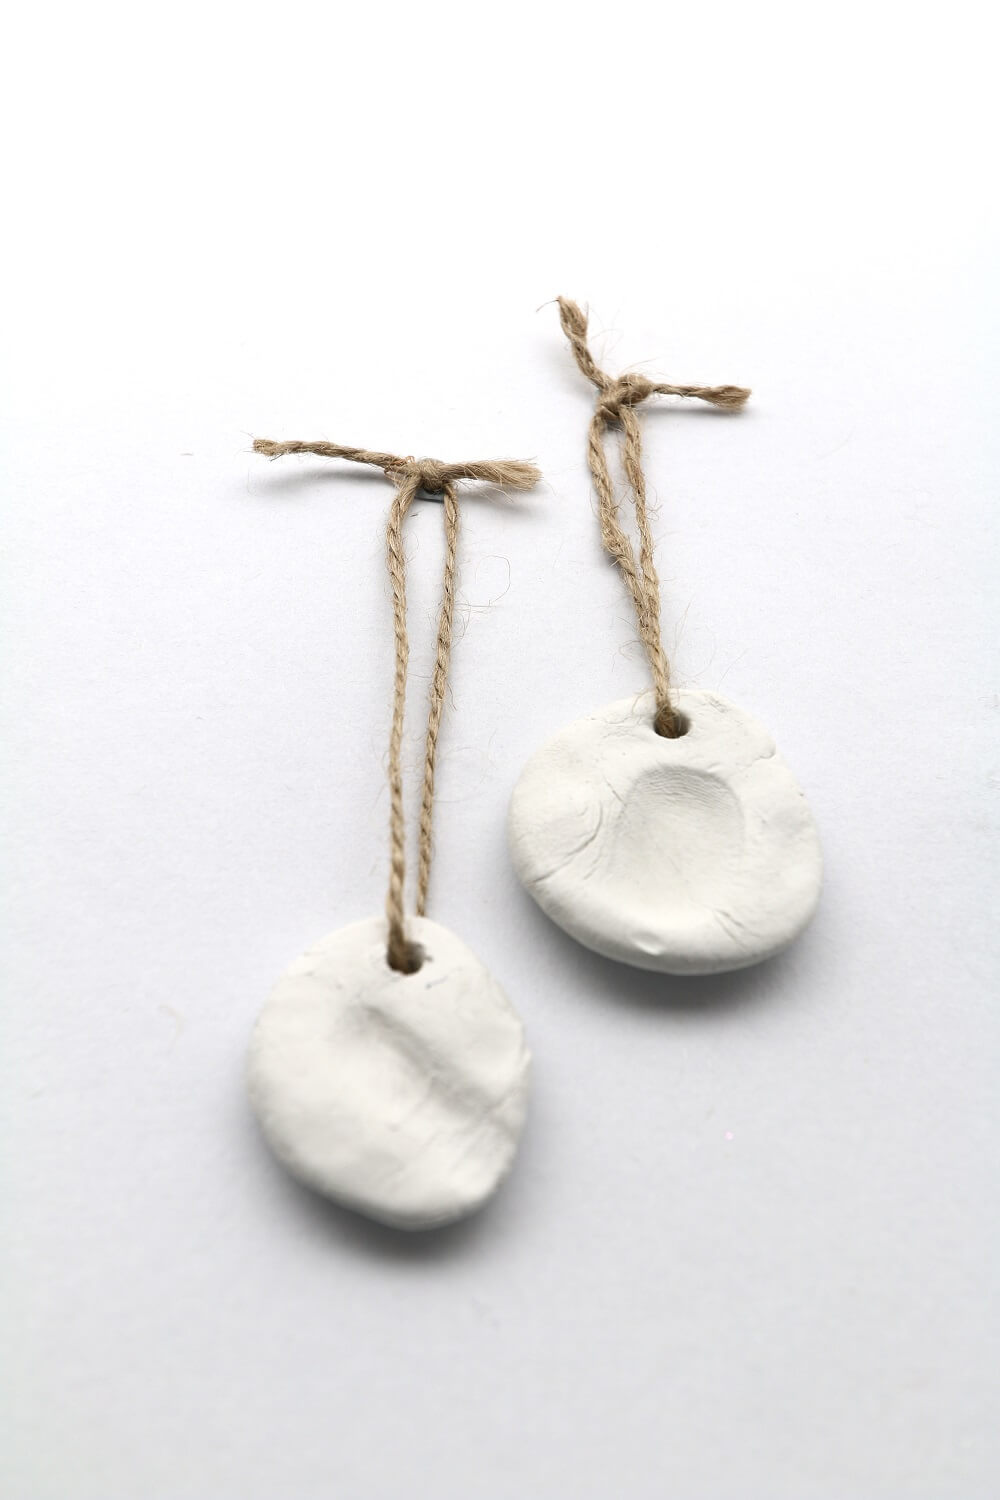 Two clay medallions with fingerprints and a thread of kitchen twine.